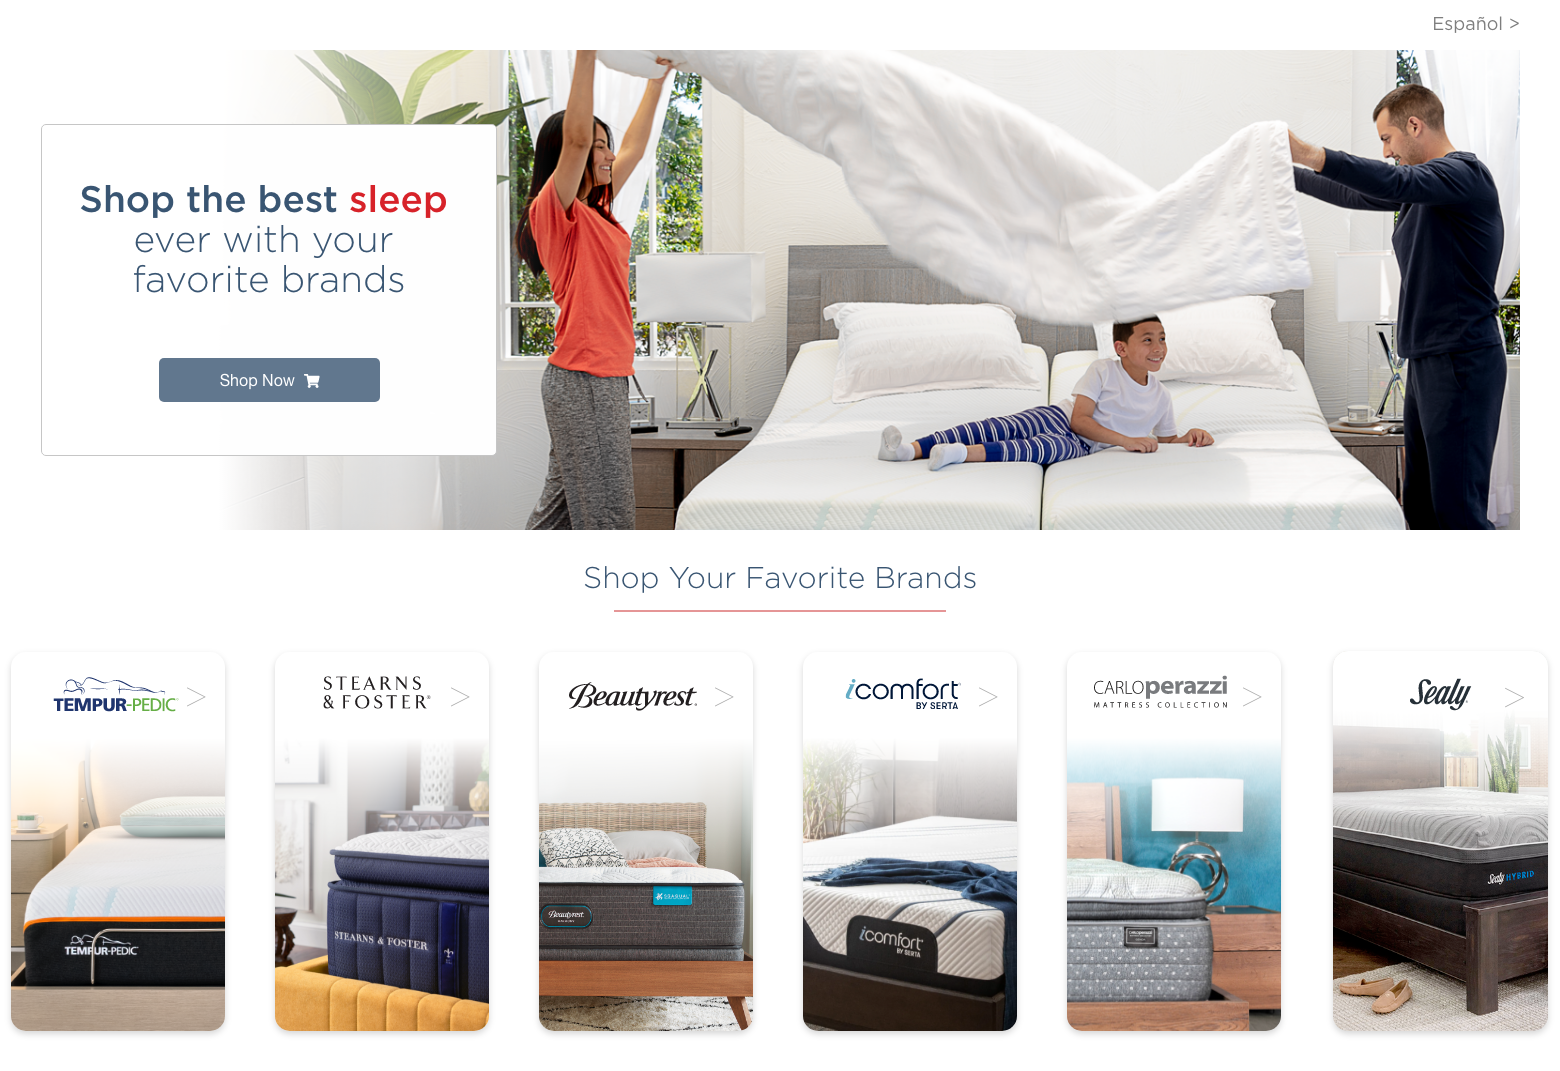 Shop the best sleep ever with your favorite brands. Shop now. Shop your favorite brands.